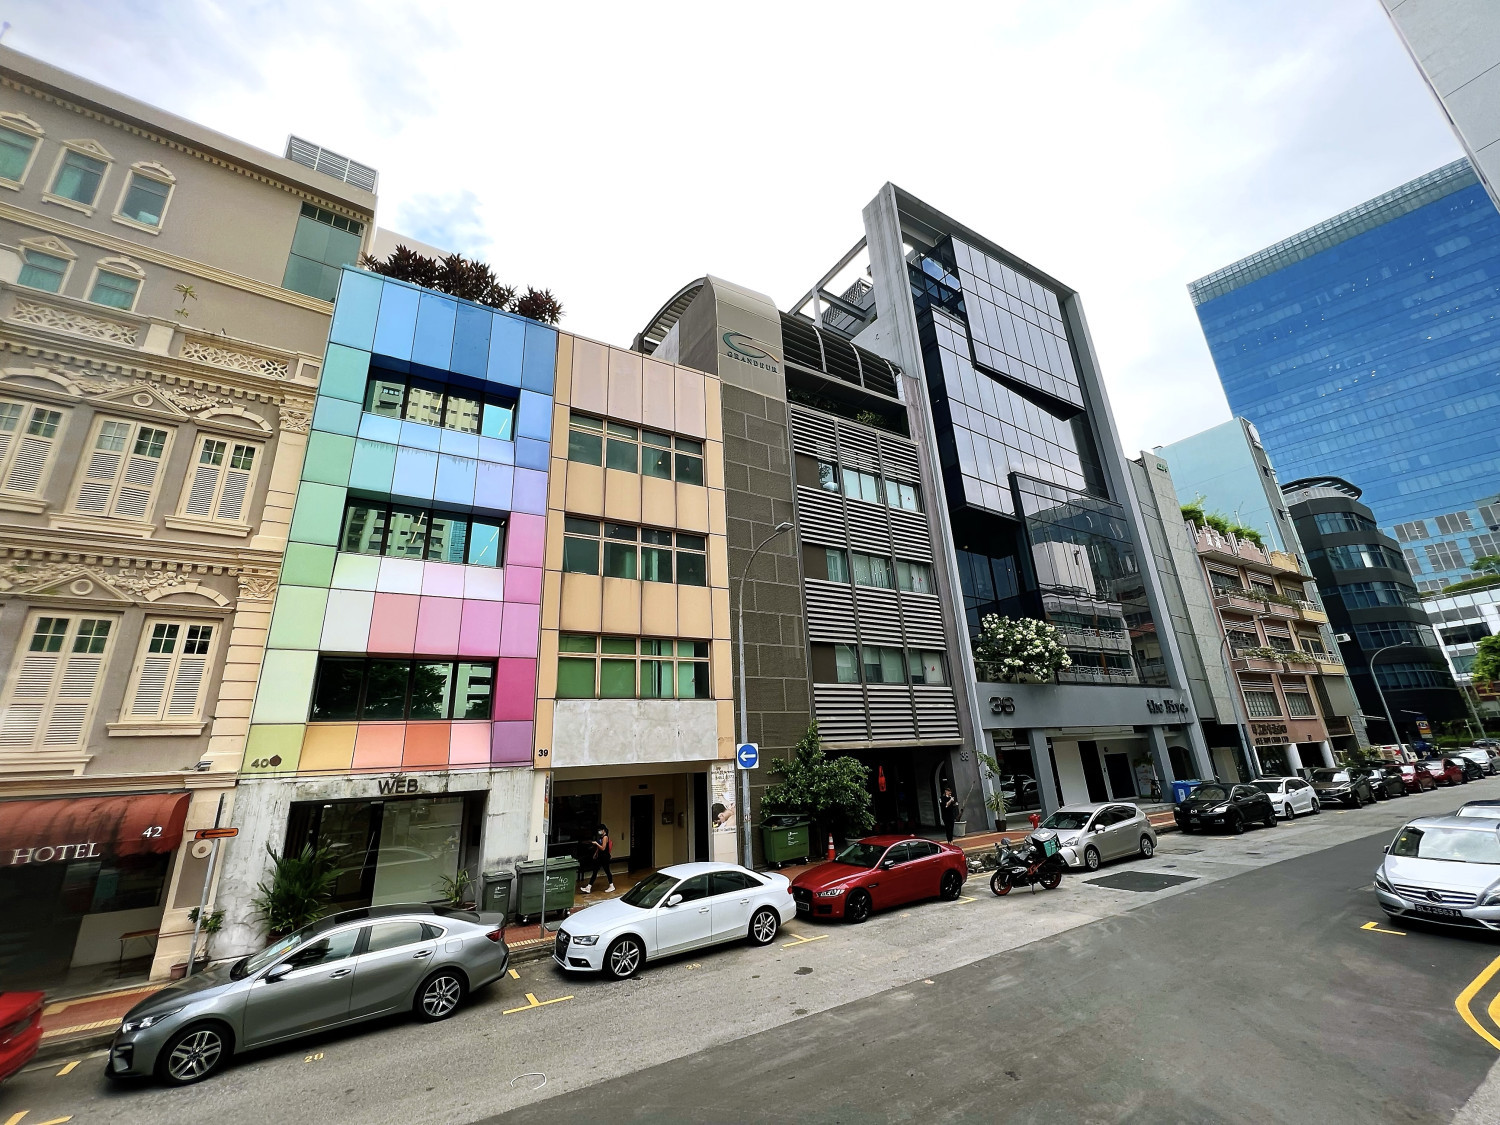 Commercial building on Carpenter Street selling for $10 mil - Property News